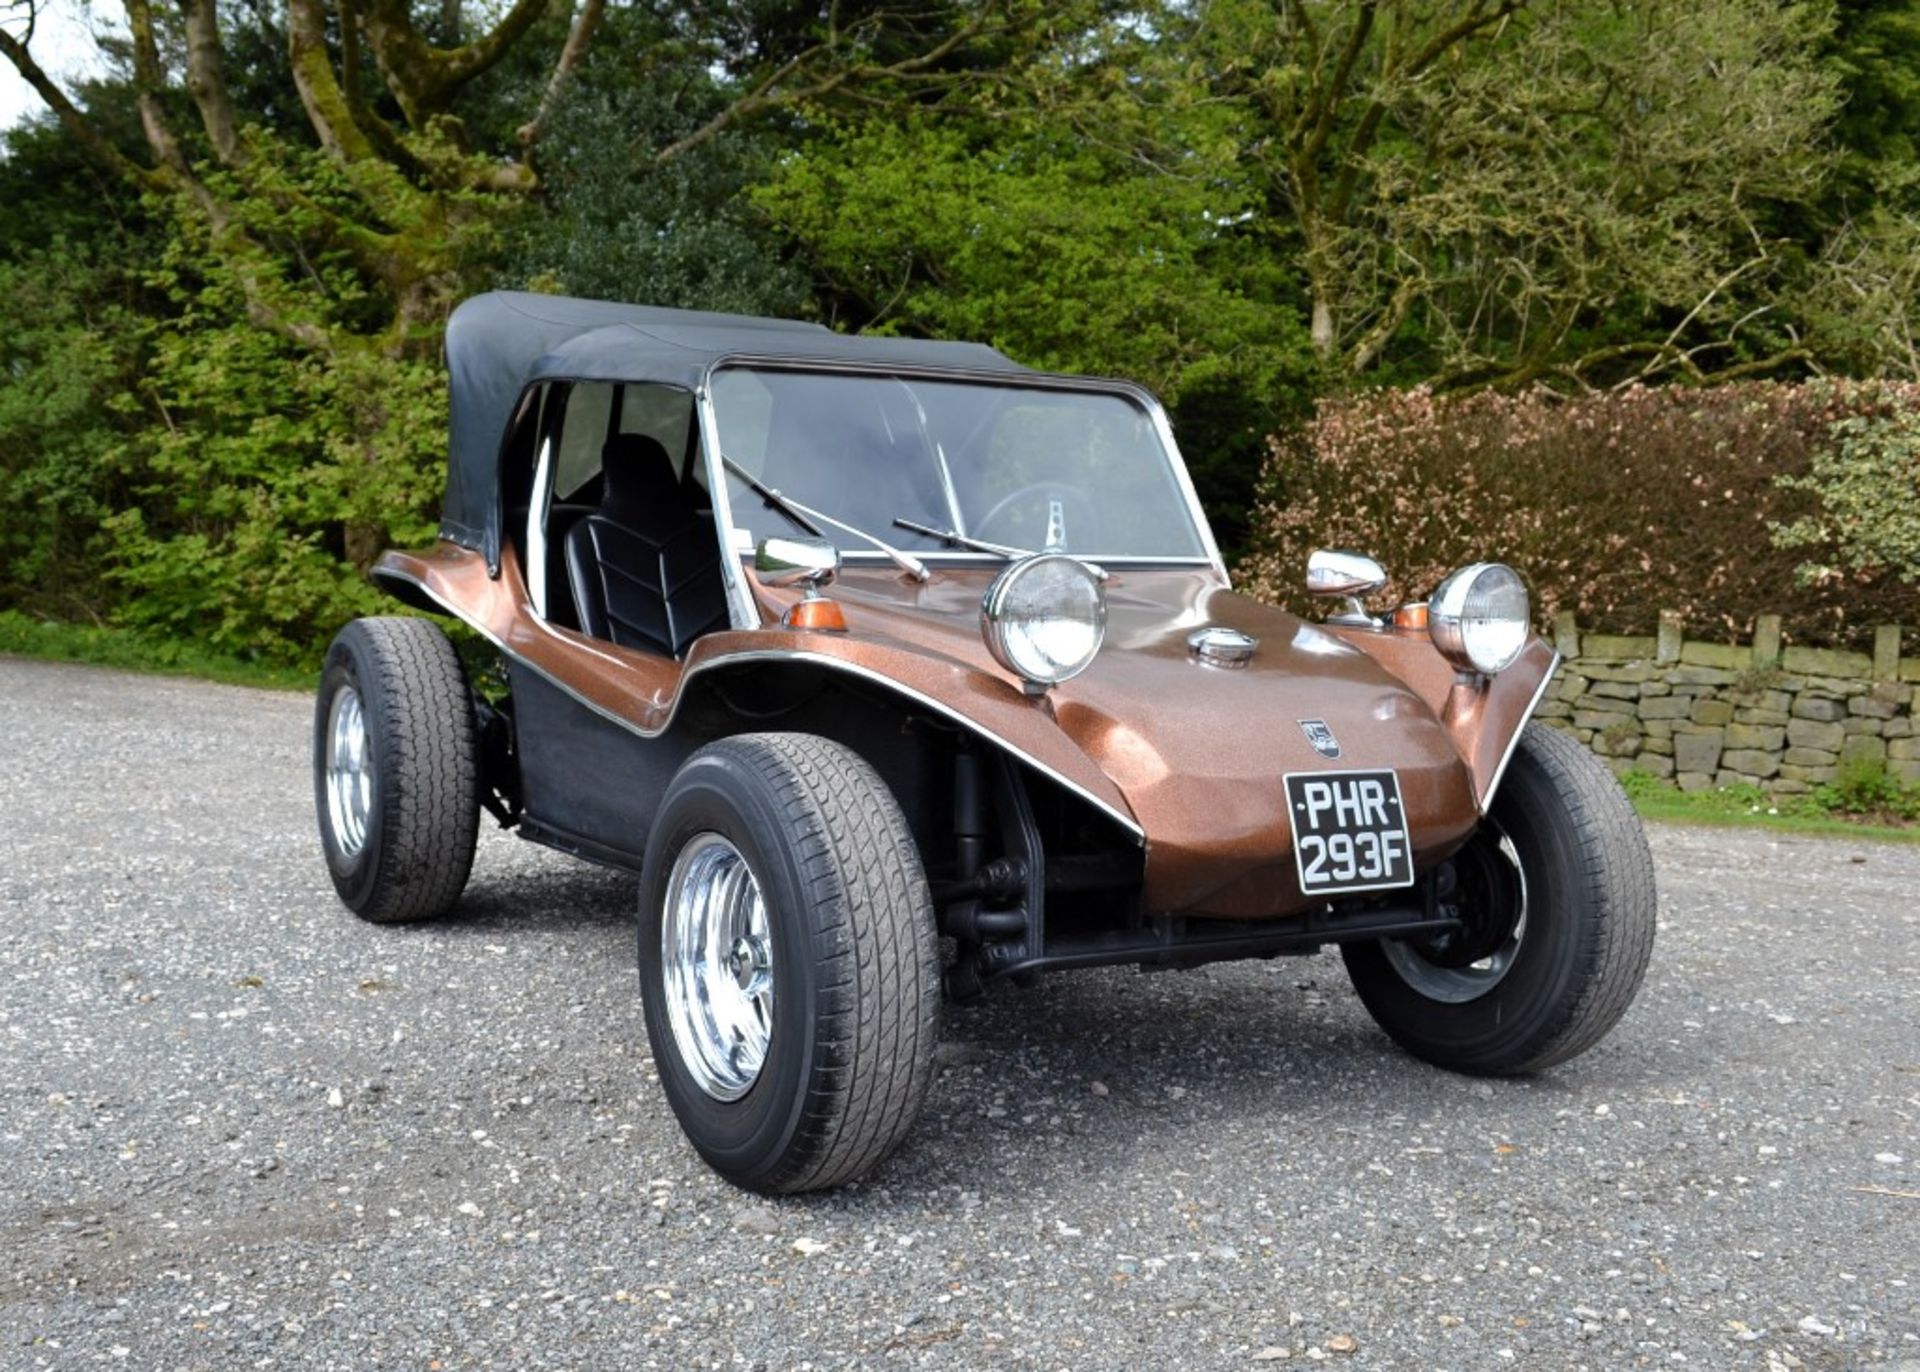 1968 Volkswagen Beach Buggy SWB ‘Meyers Manx Evocation’ No Reserve - Image 6 of 29